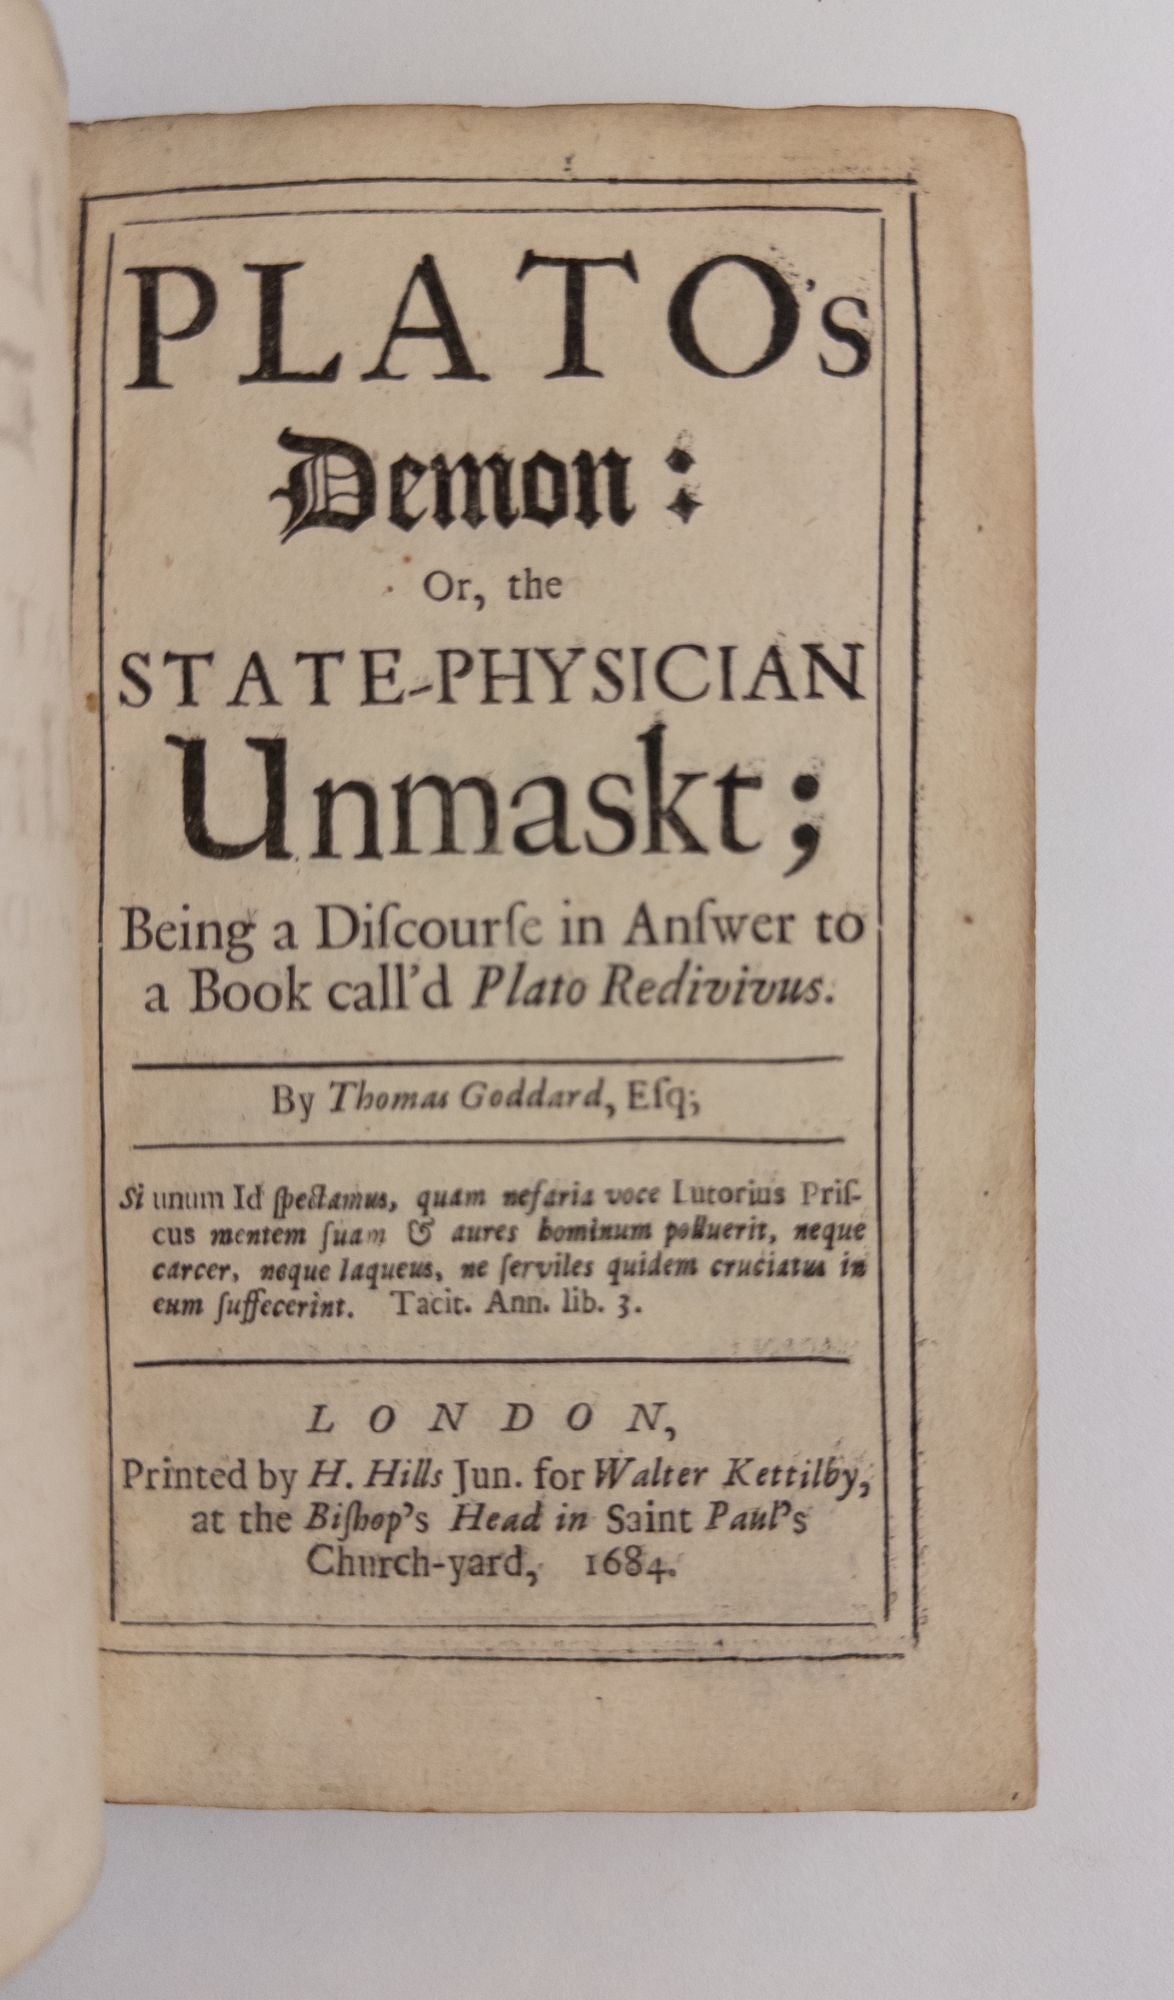 Product Image for Plato's Demon: or, The State Physician Unmaskt